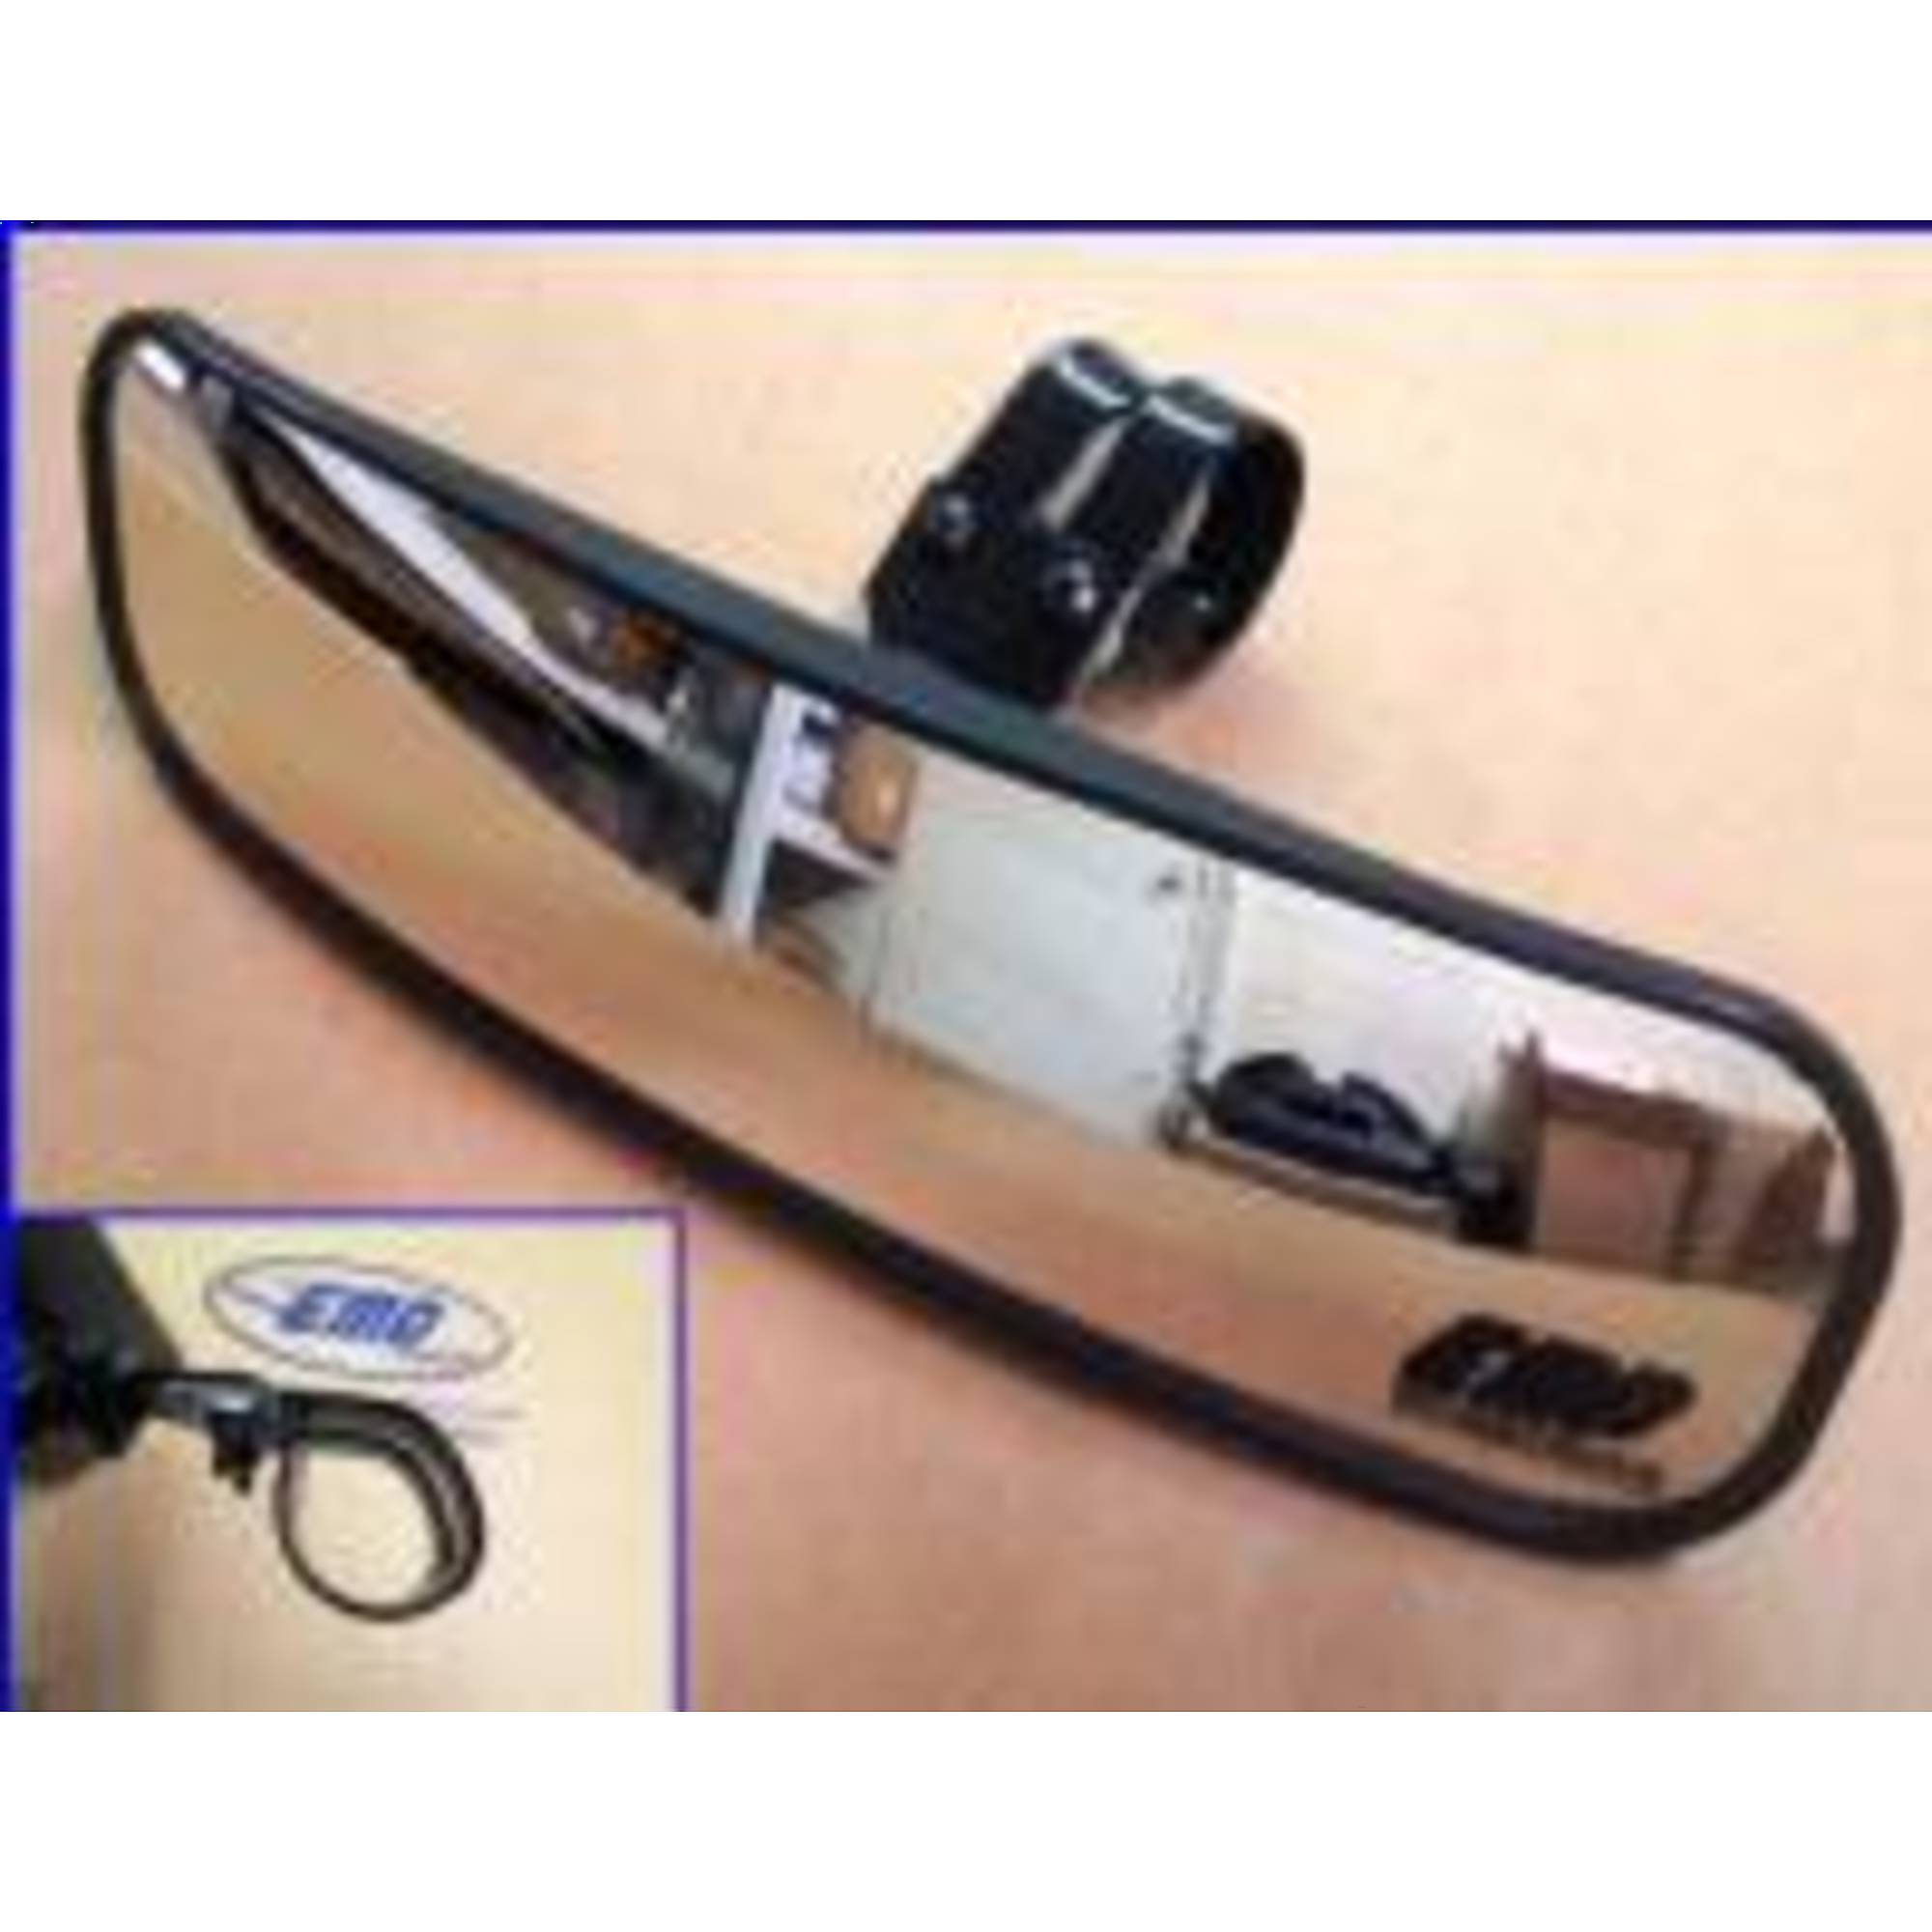 Panoramic Rear Mirror (2Inch), Model - Extreme Metal Products 12533-2 inch